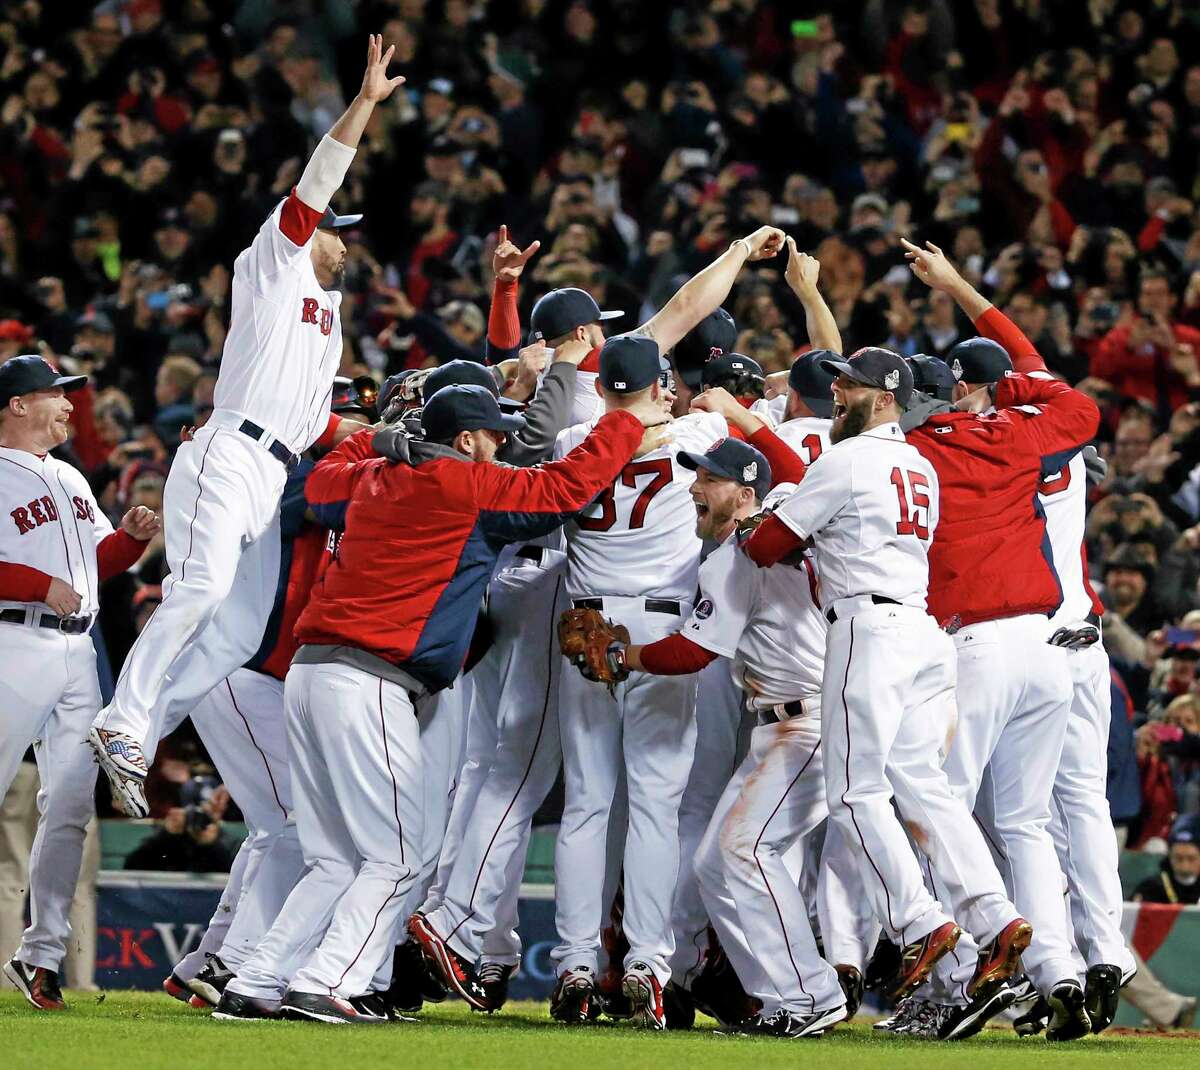 BOSTON RED SOX 2004 - One of the most amazing comebacks in